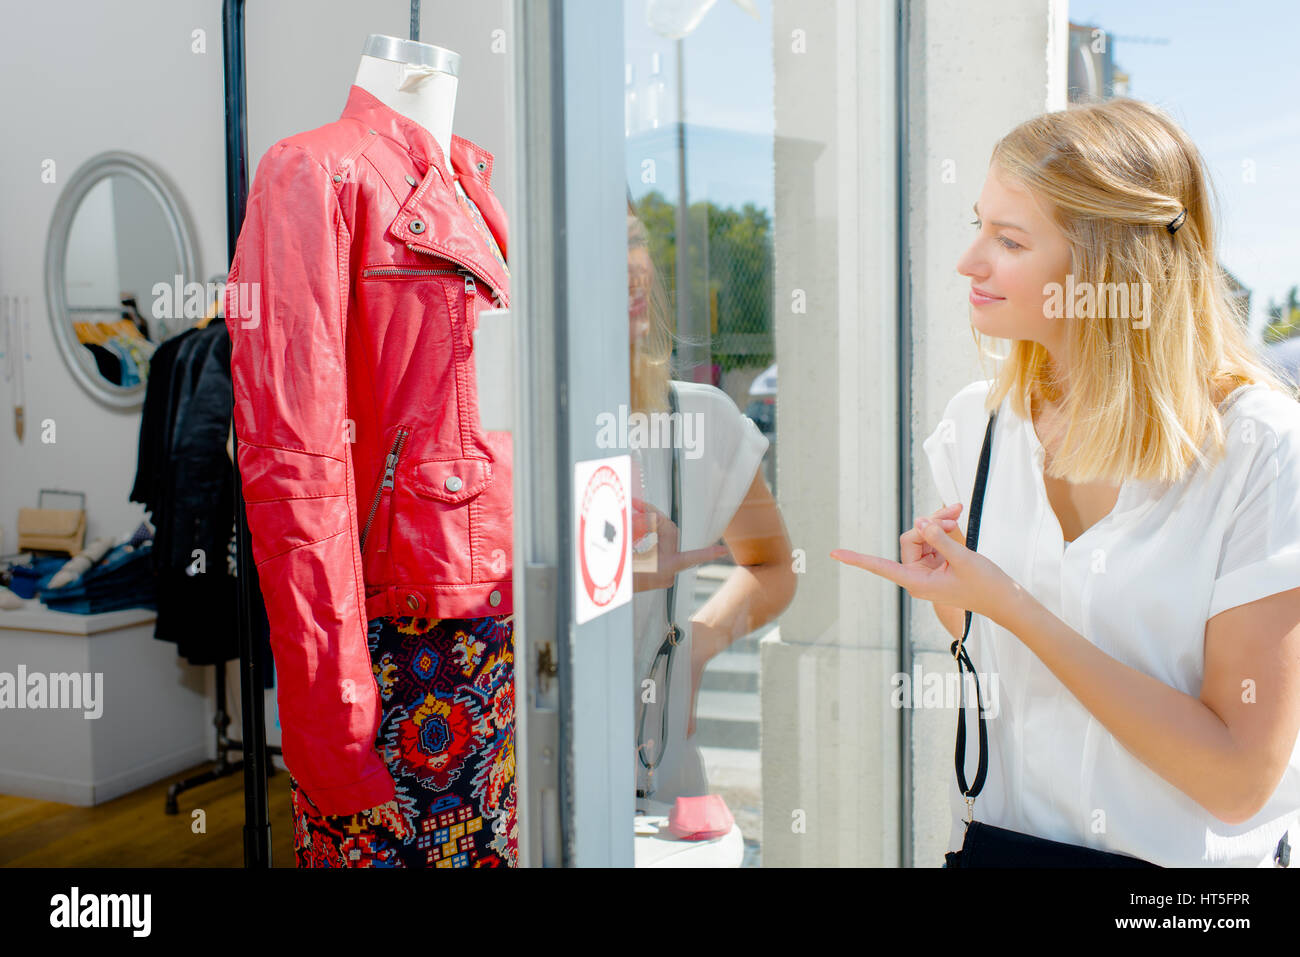 Young woman shopping Banque D'Images